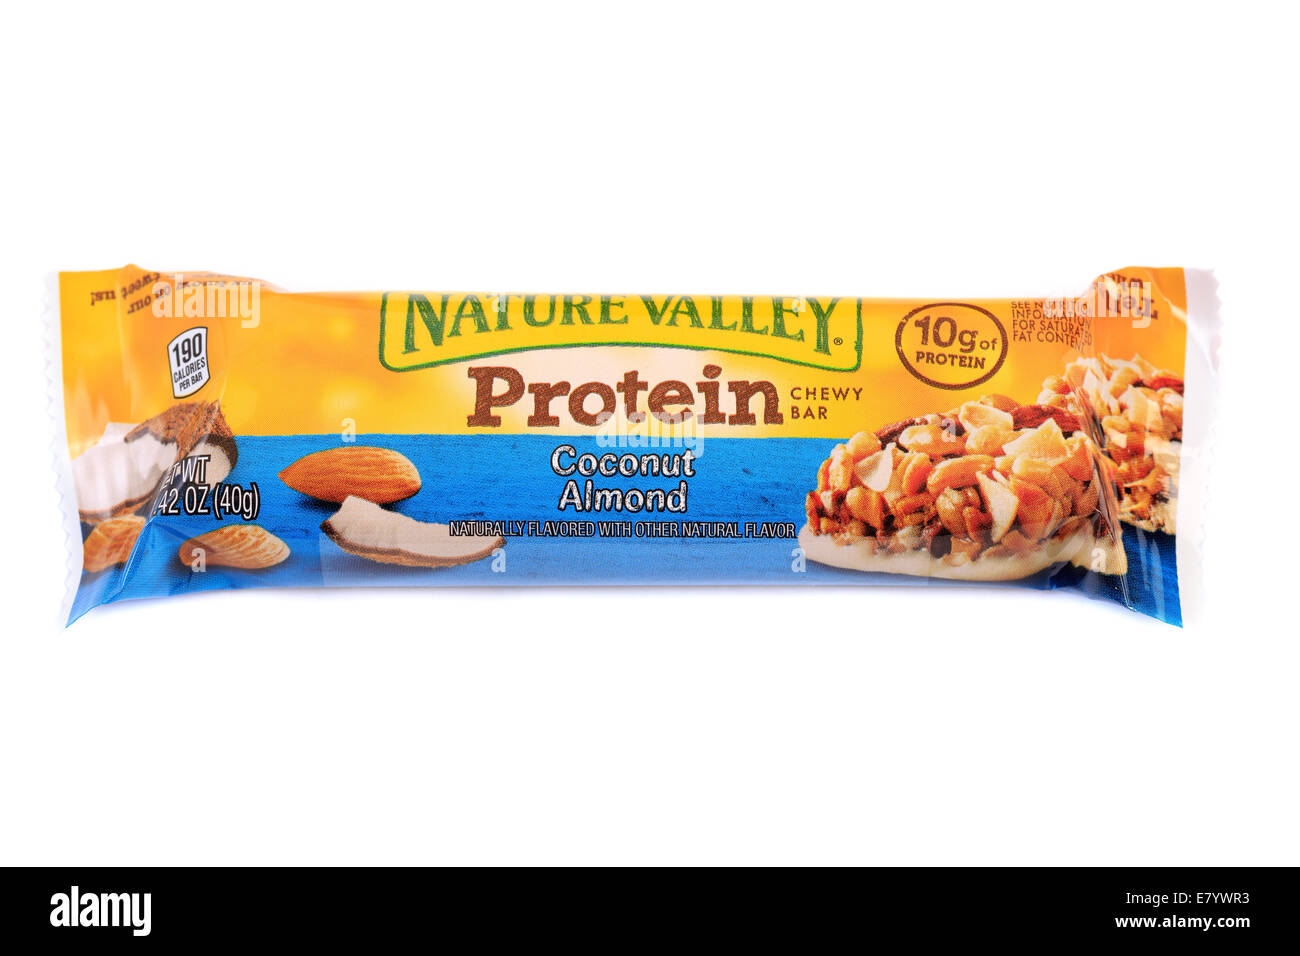 Nature Valley Coconut Almond Chewy Protein Bar Stock Photo